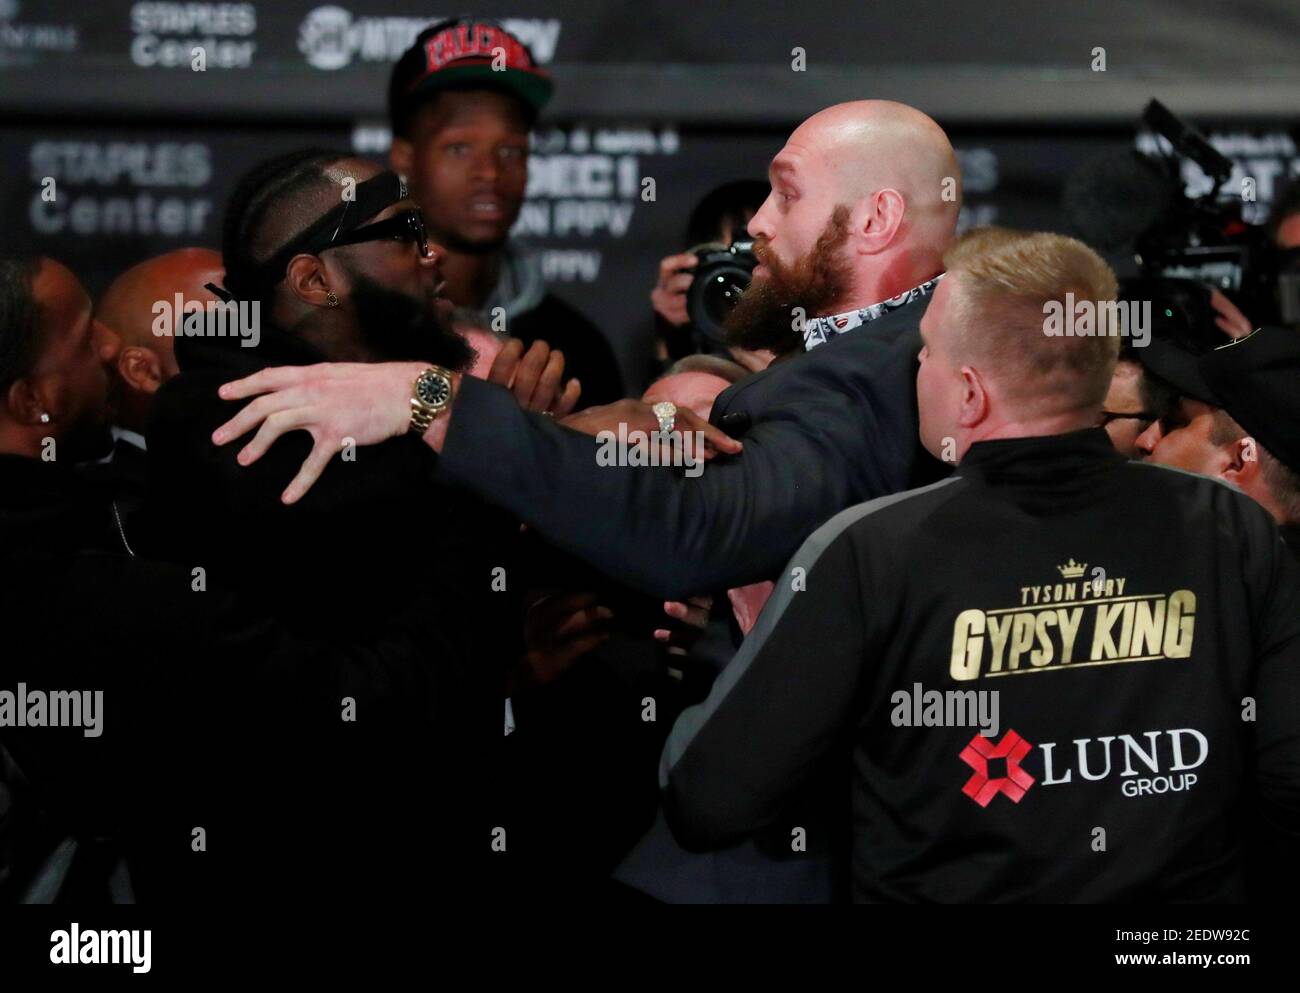 Boxing - Deontay Wilder & Tyson Fury Press Conference - The Westin  Bonaventure Hotel & Suites, Los Angeles, United States - November 28, 2018  Tyson Fury squares up to Deontay Wilder during